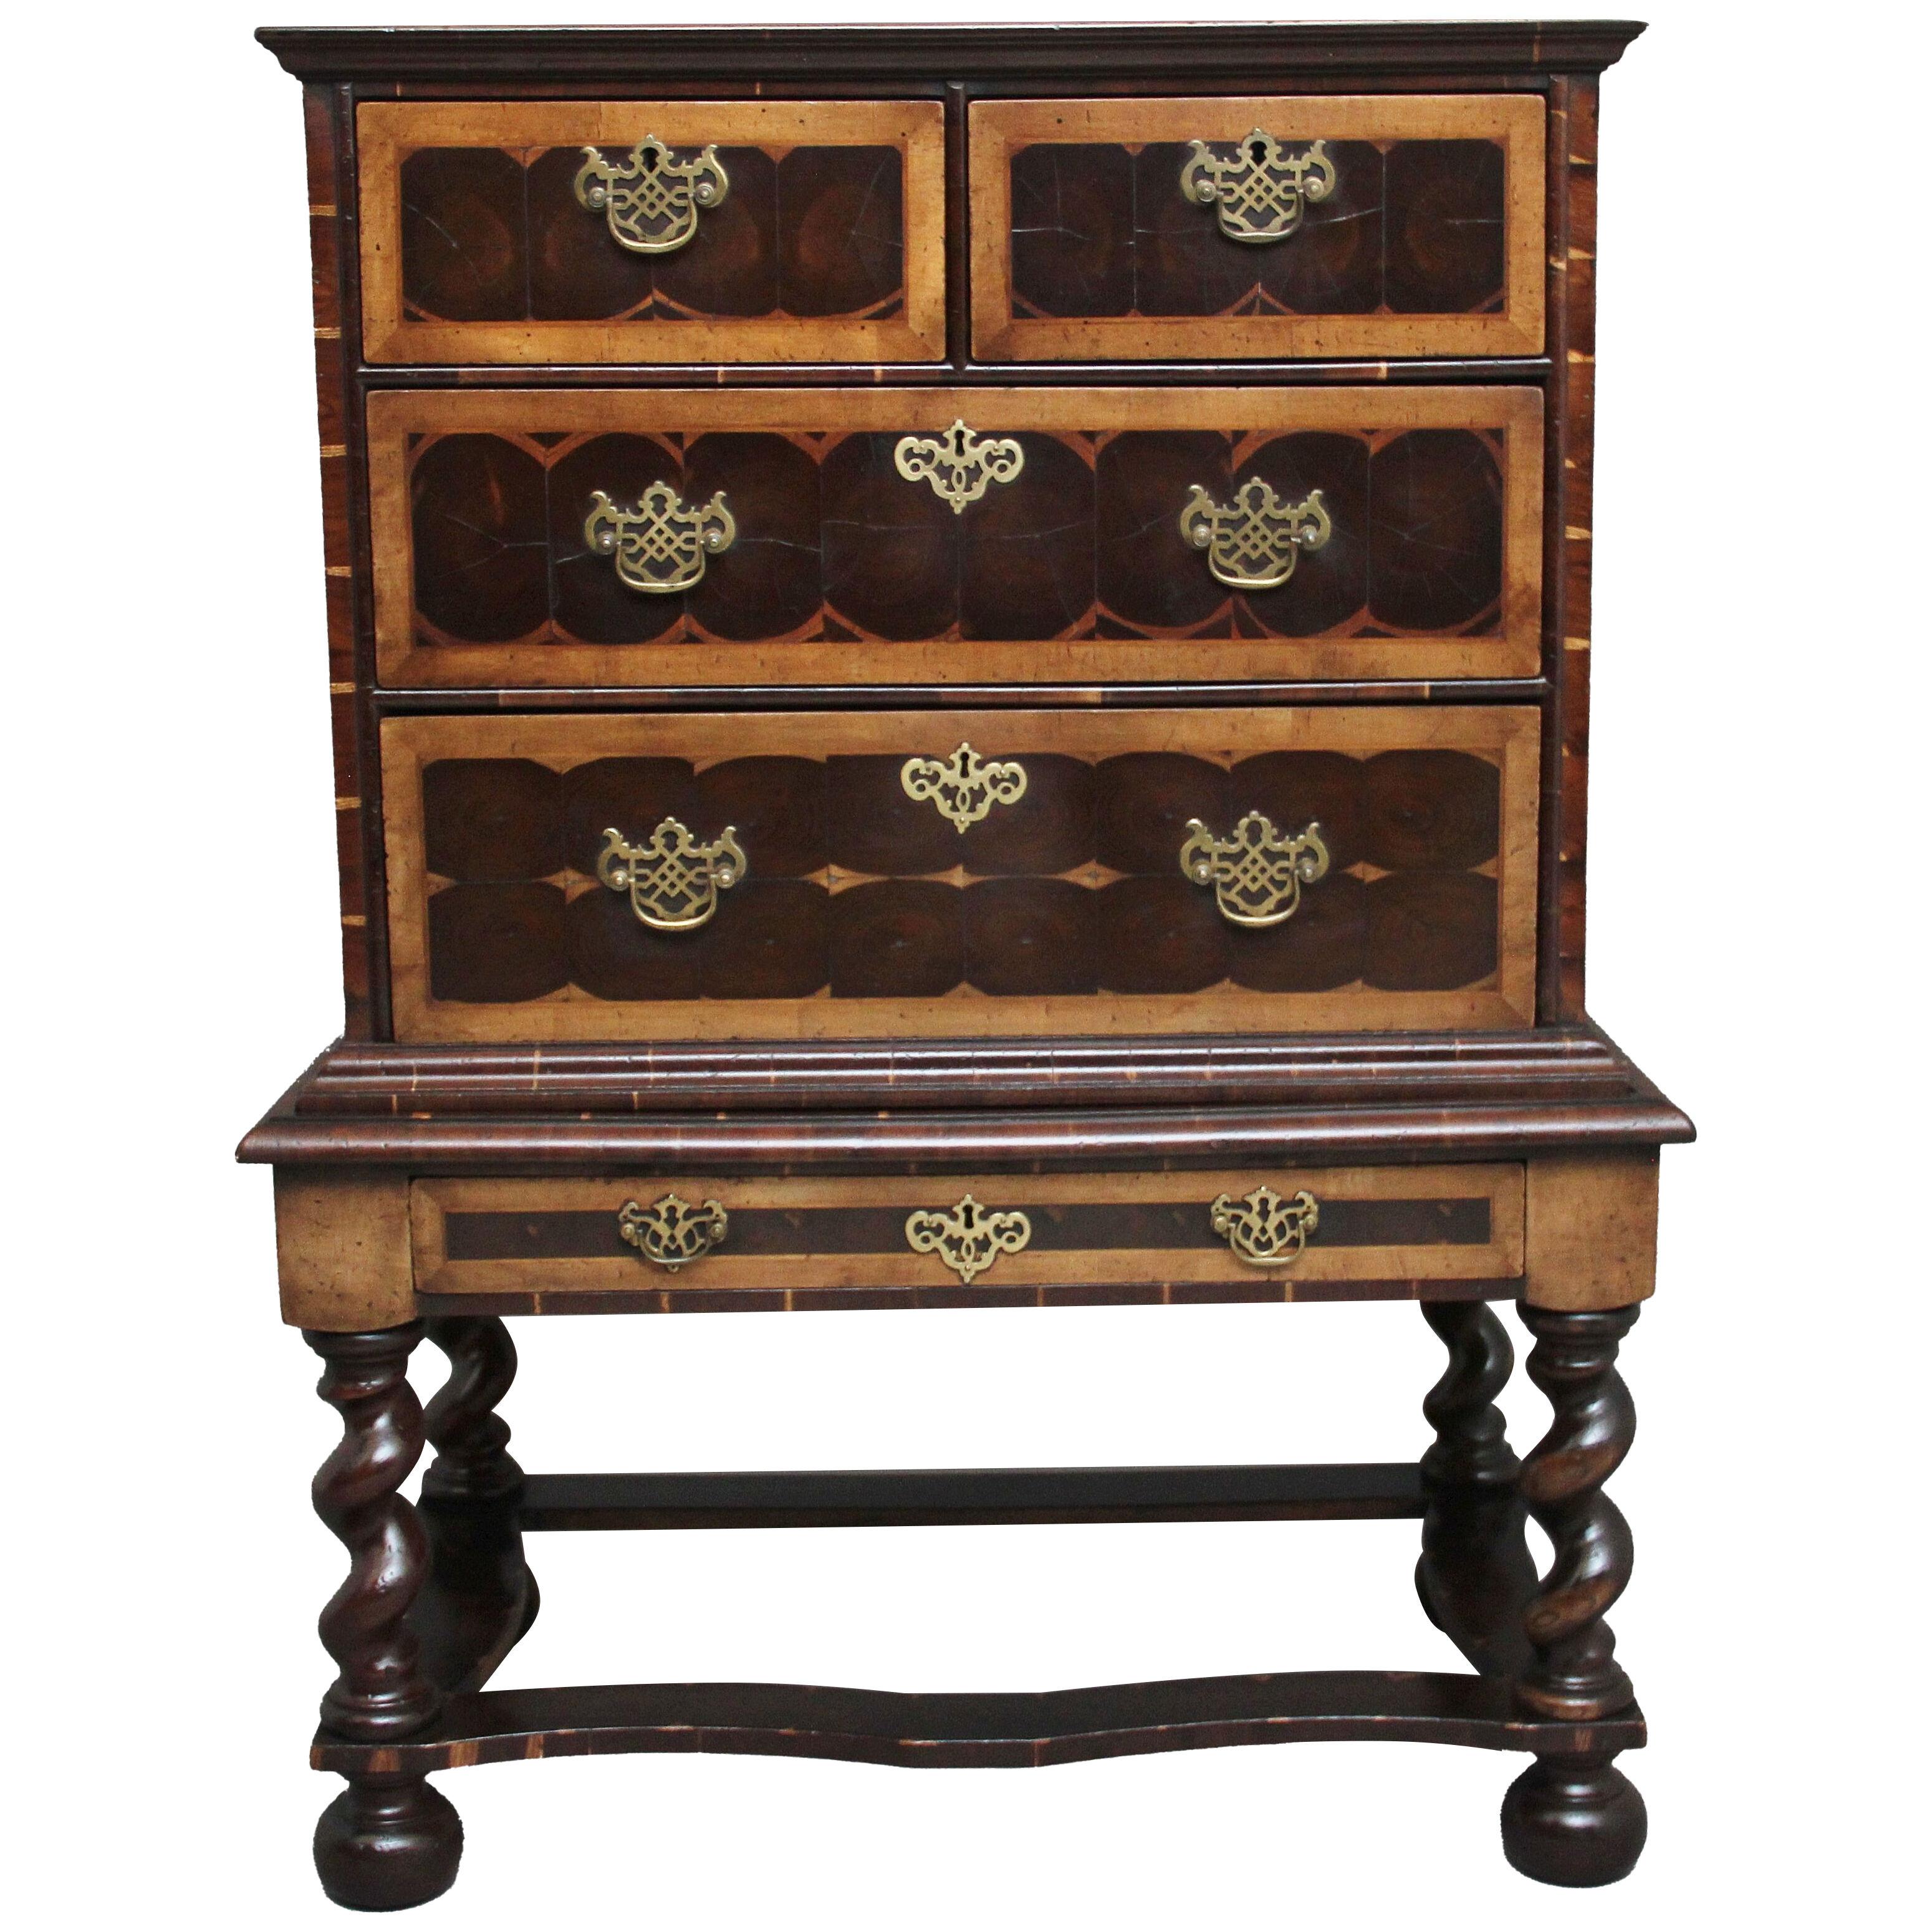 Early 20th Century laburnam oyster chest on stand in the style of William & Mary